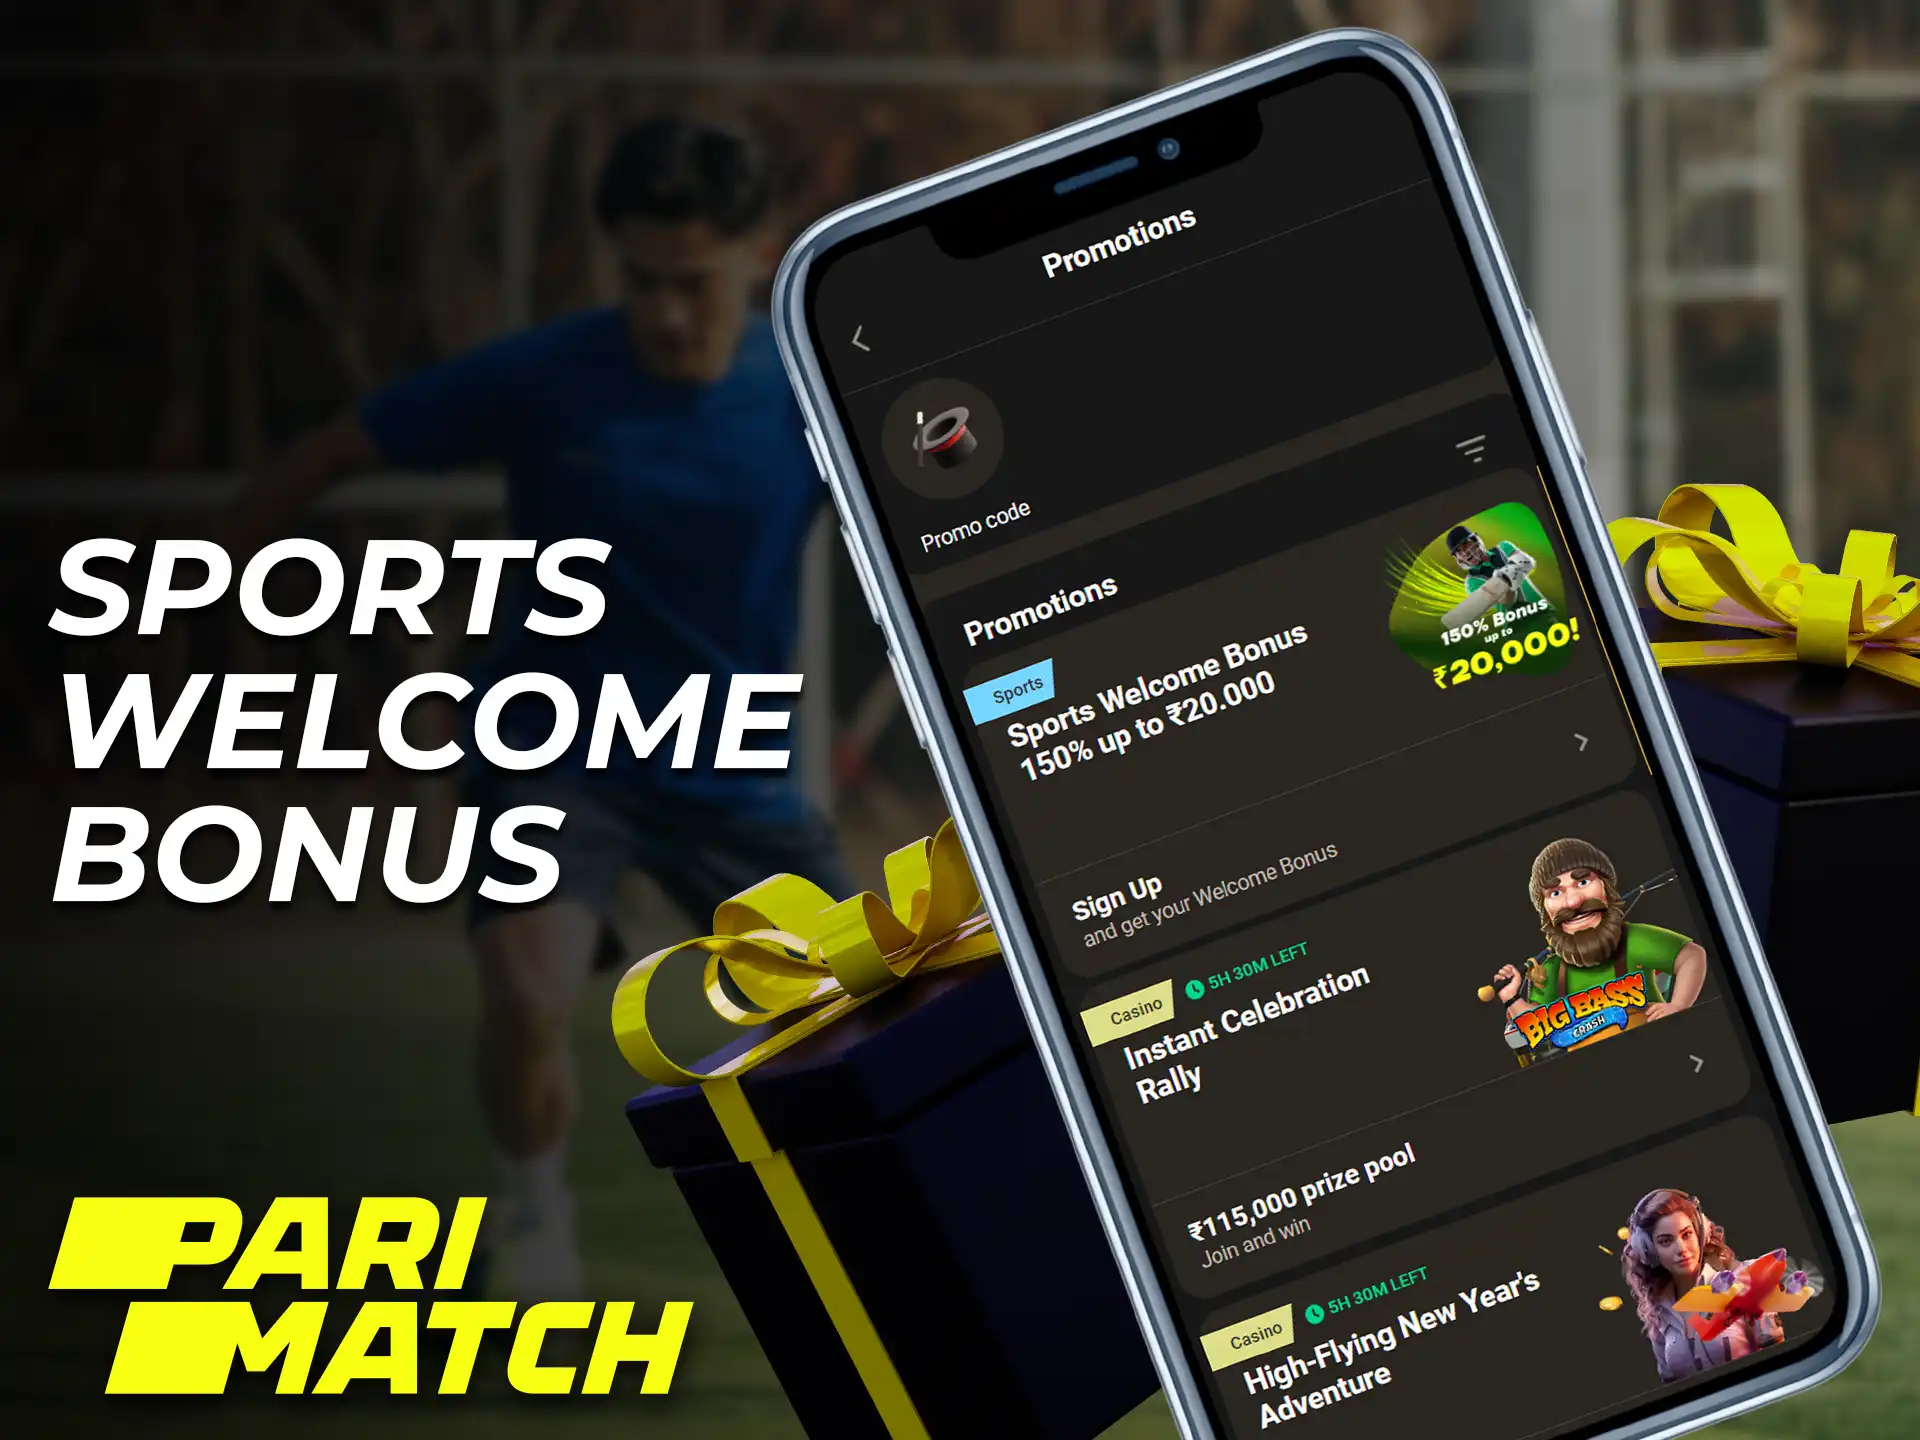 Welcome bonus on sports is available immediately after registration in the Parimatch app.